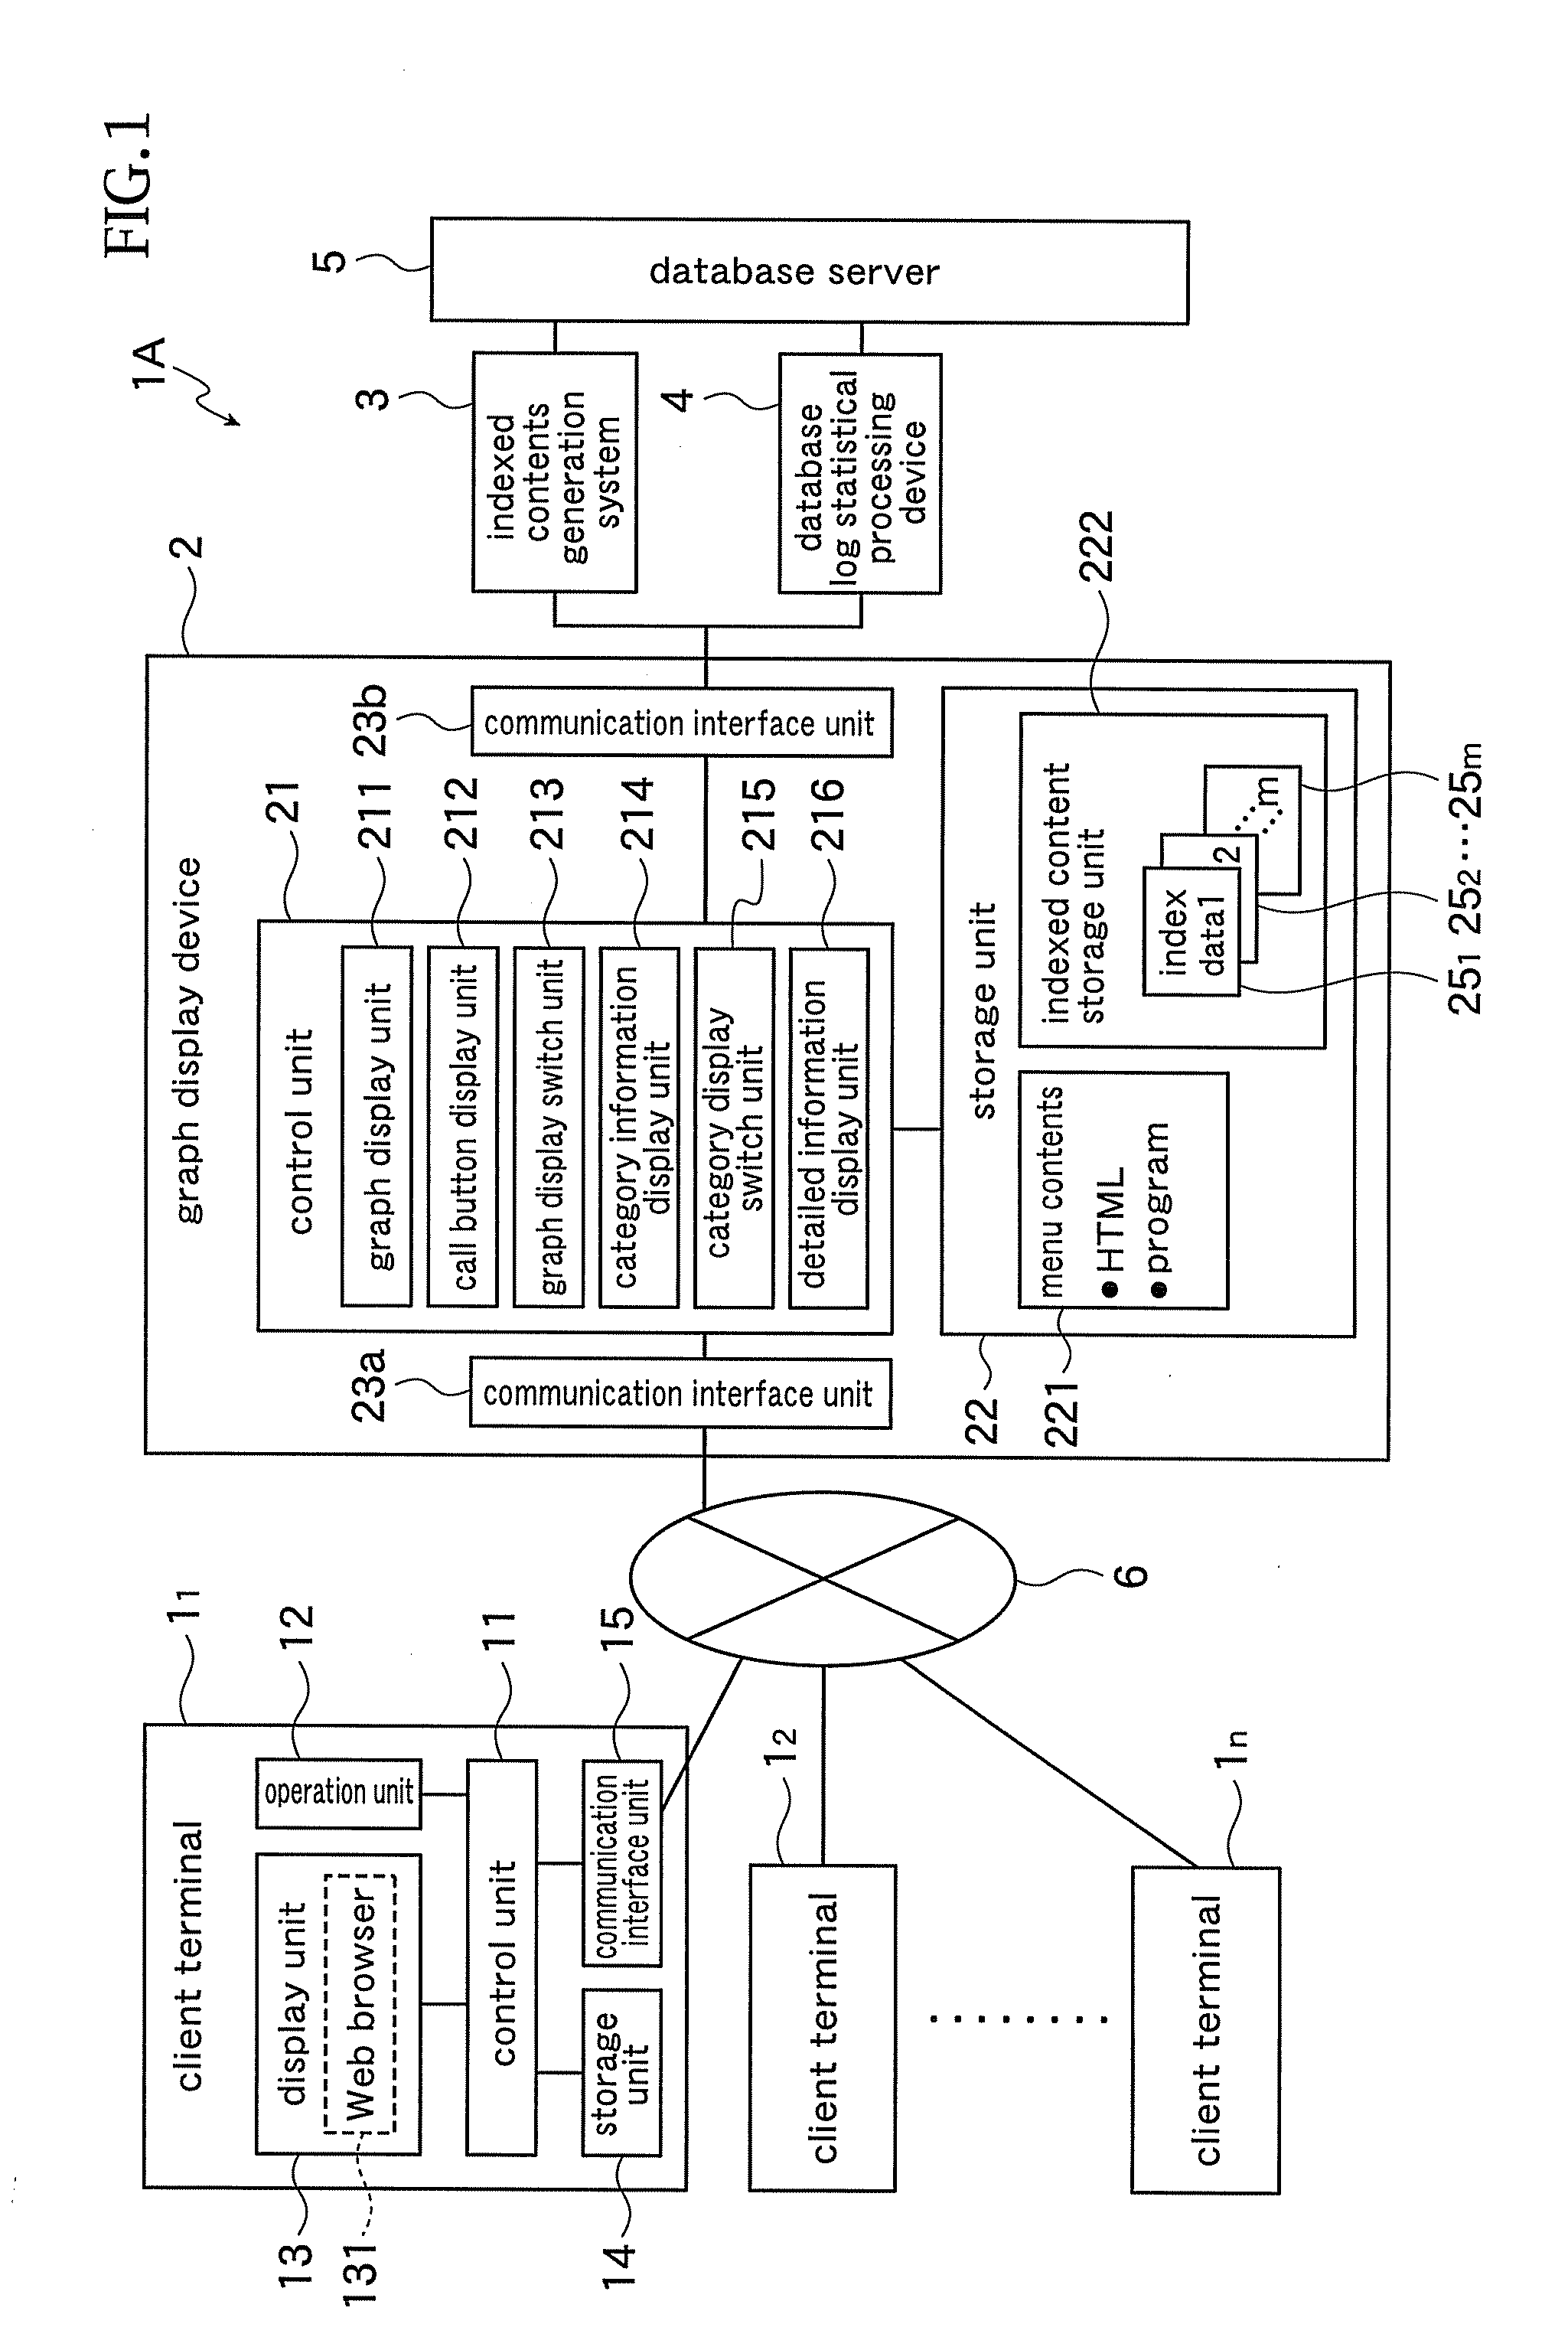 Graph display system and program